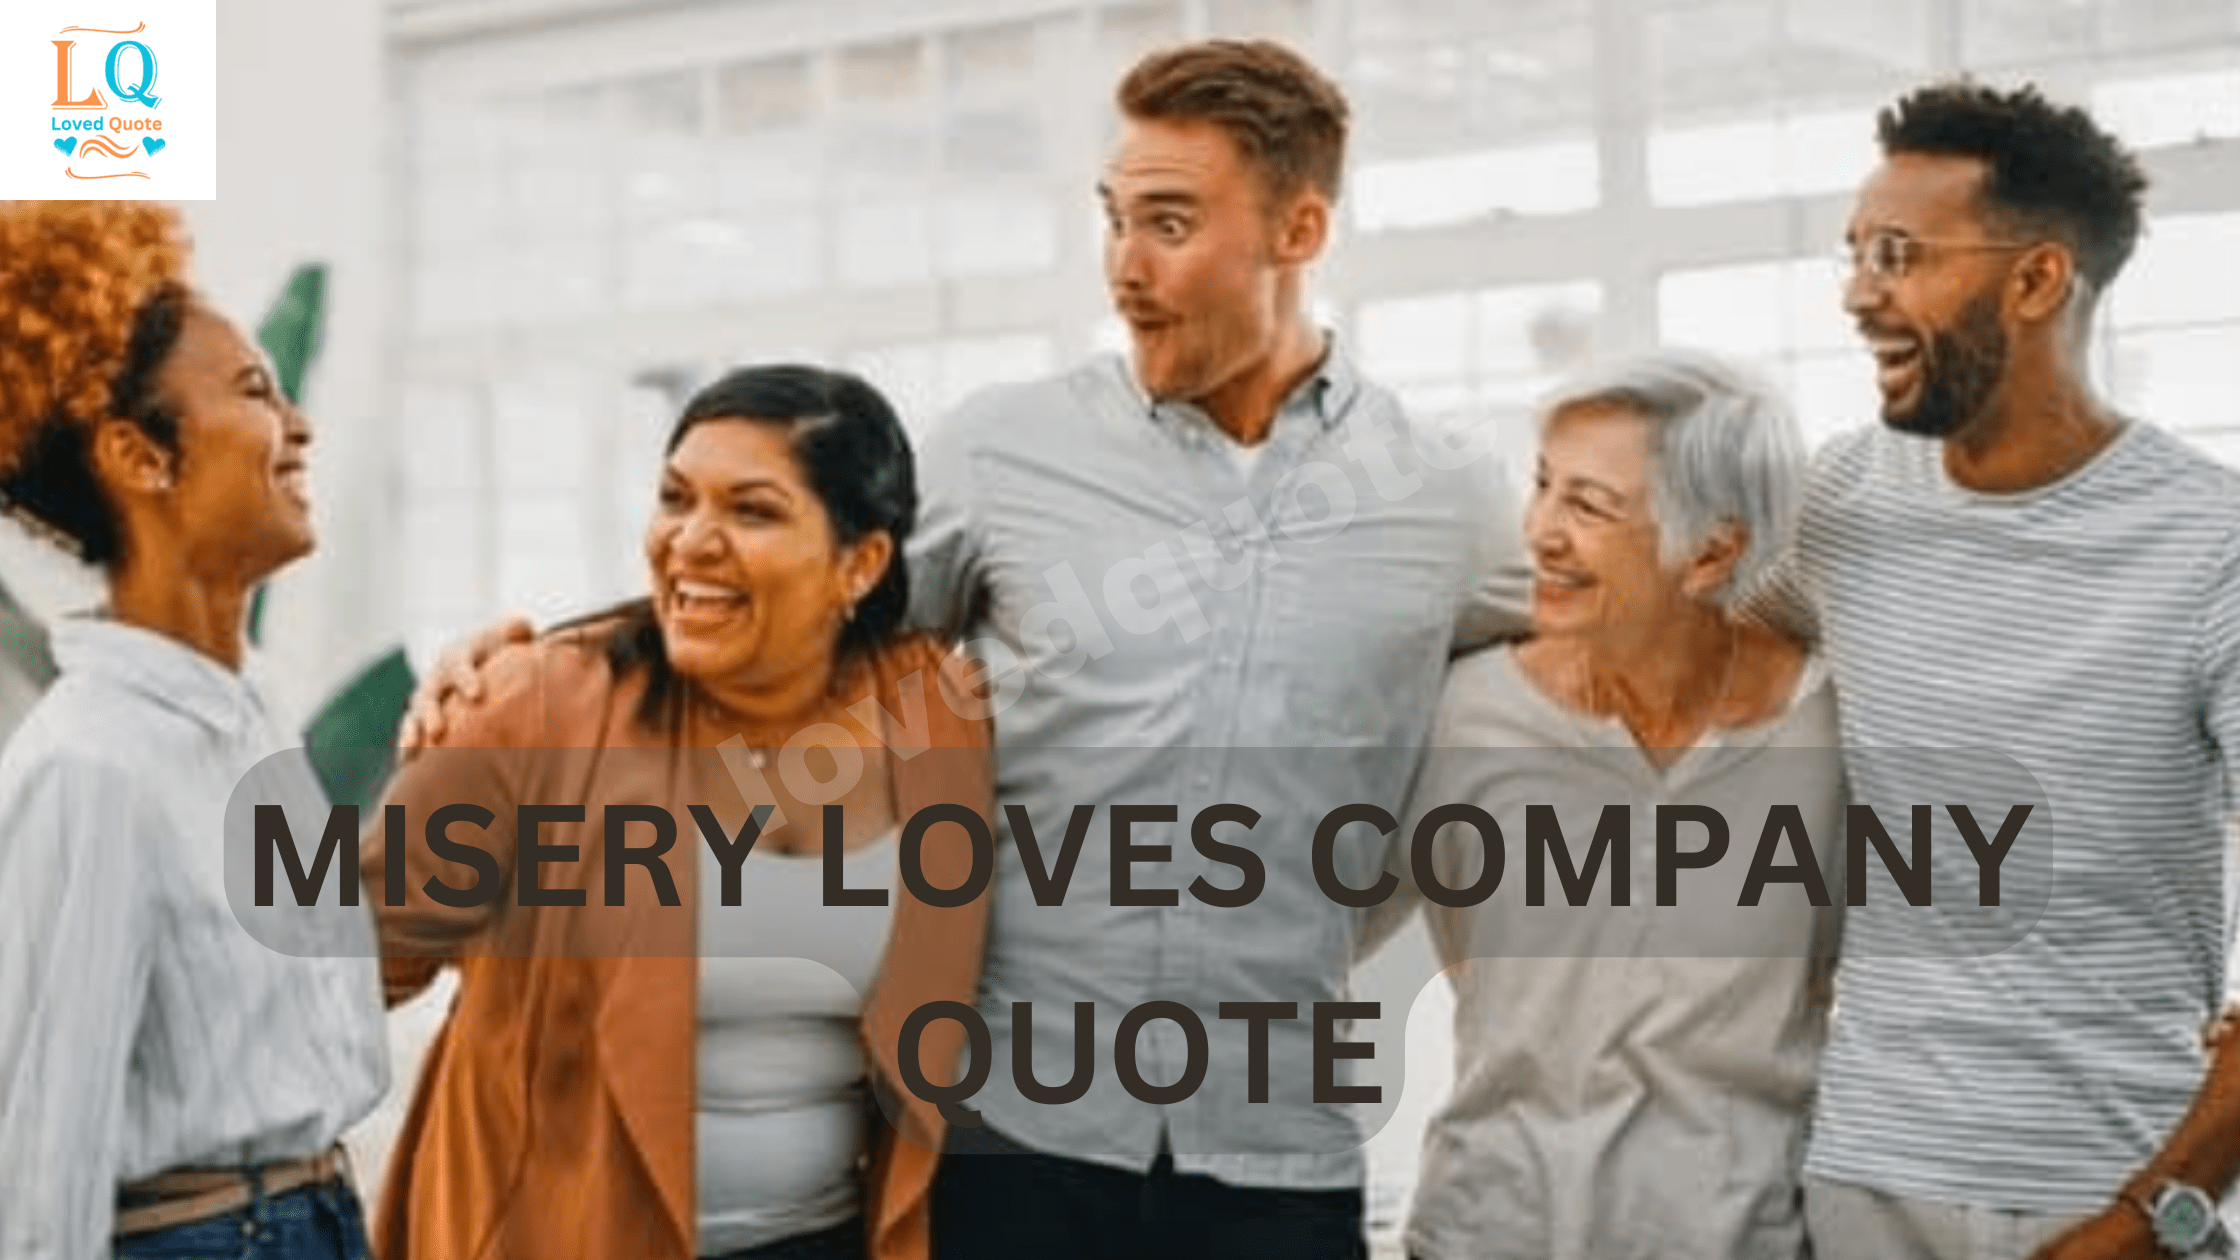 Misery Loves Company Quote